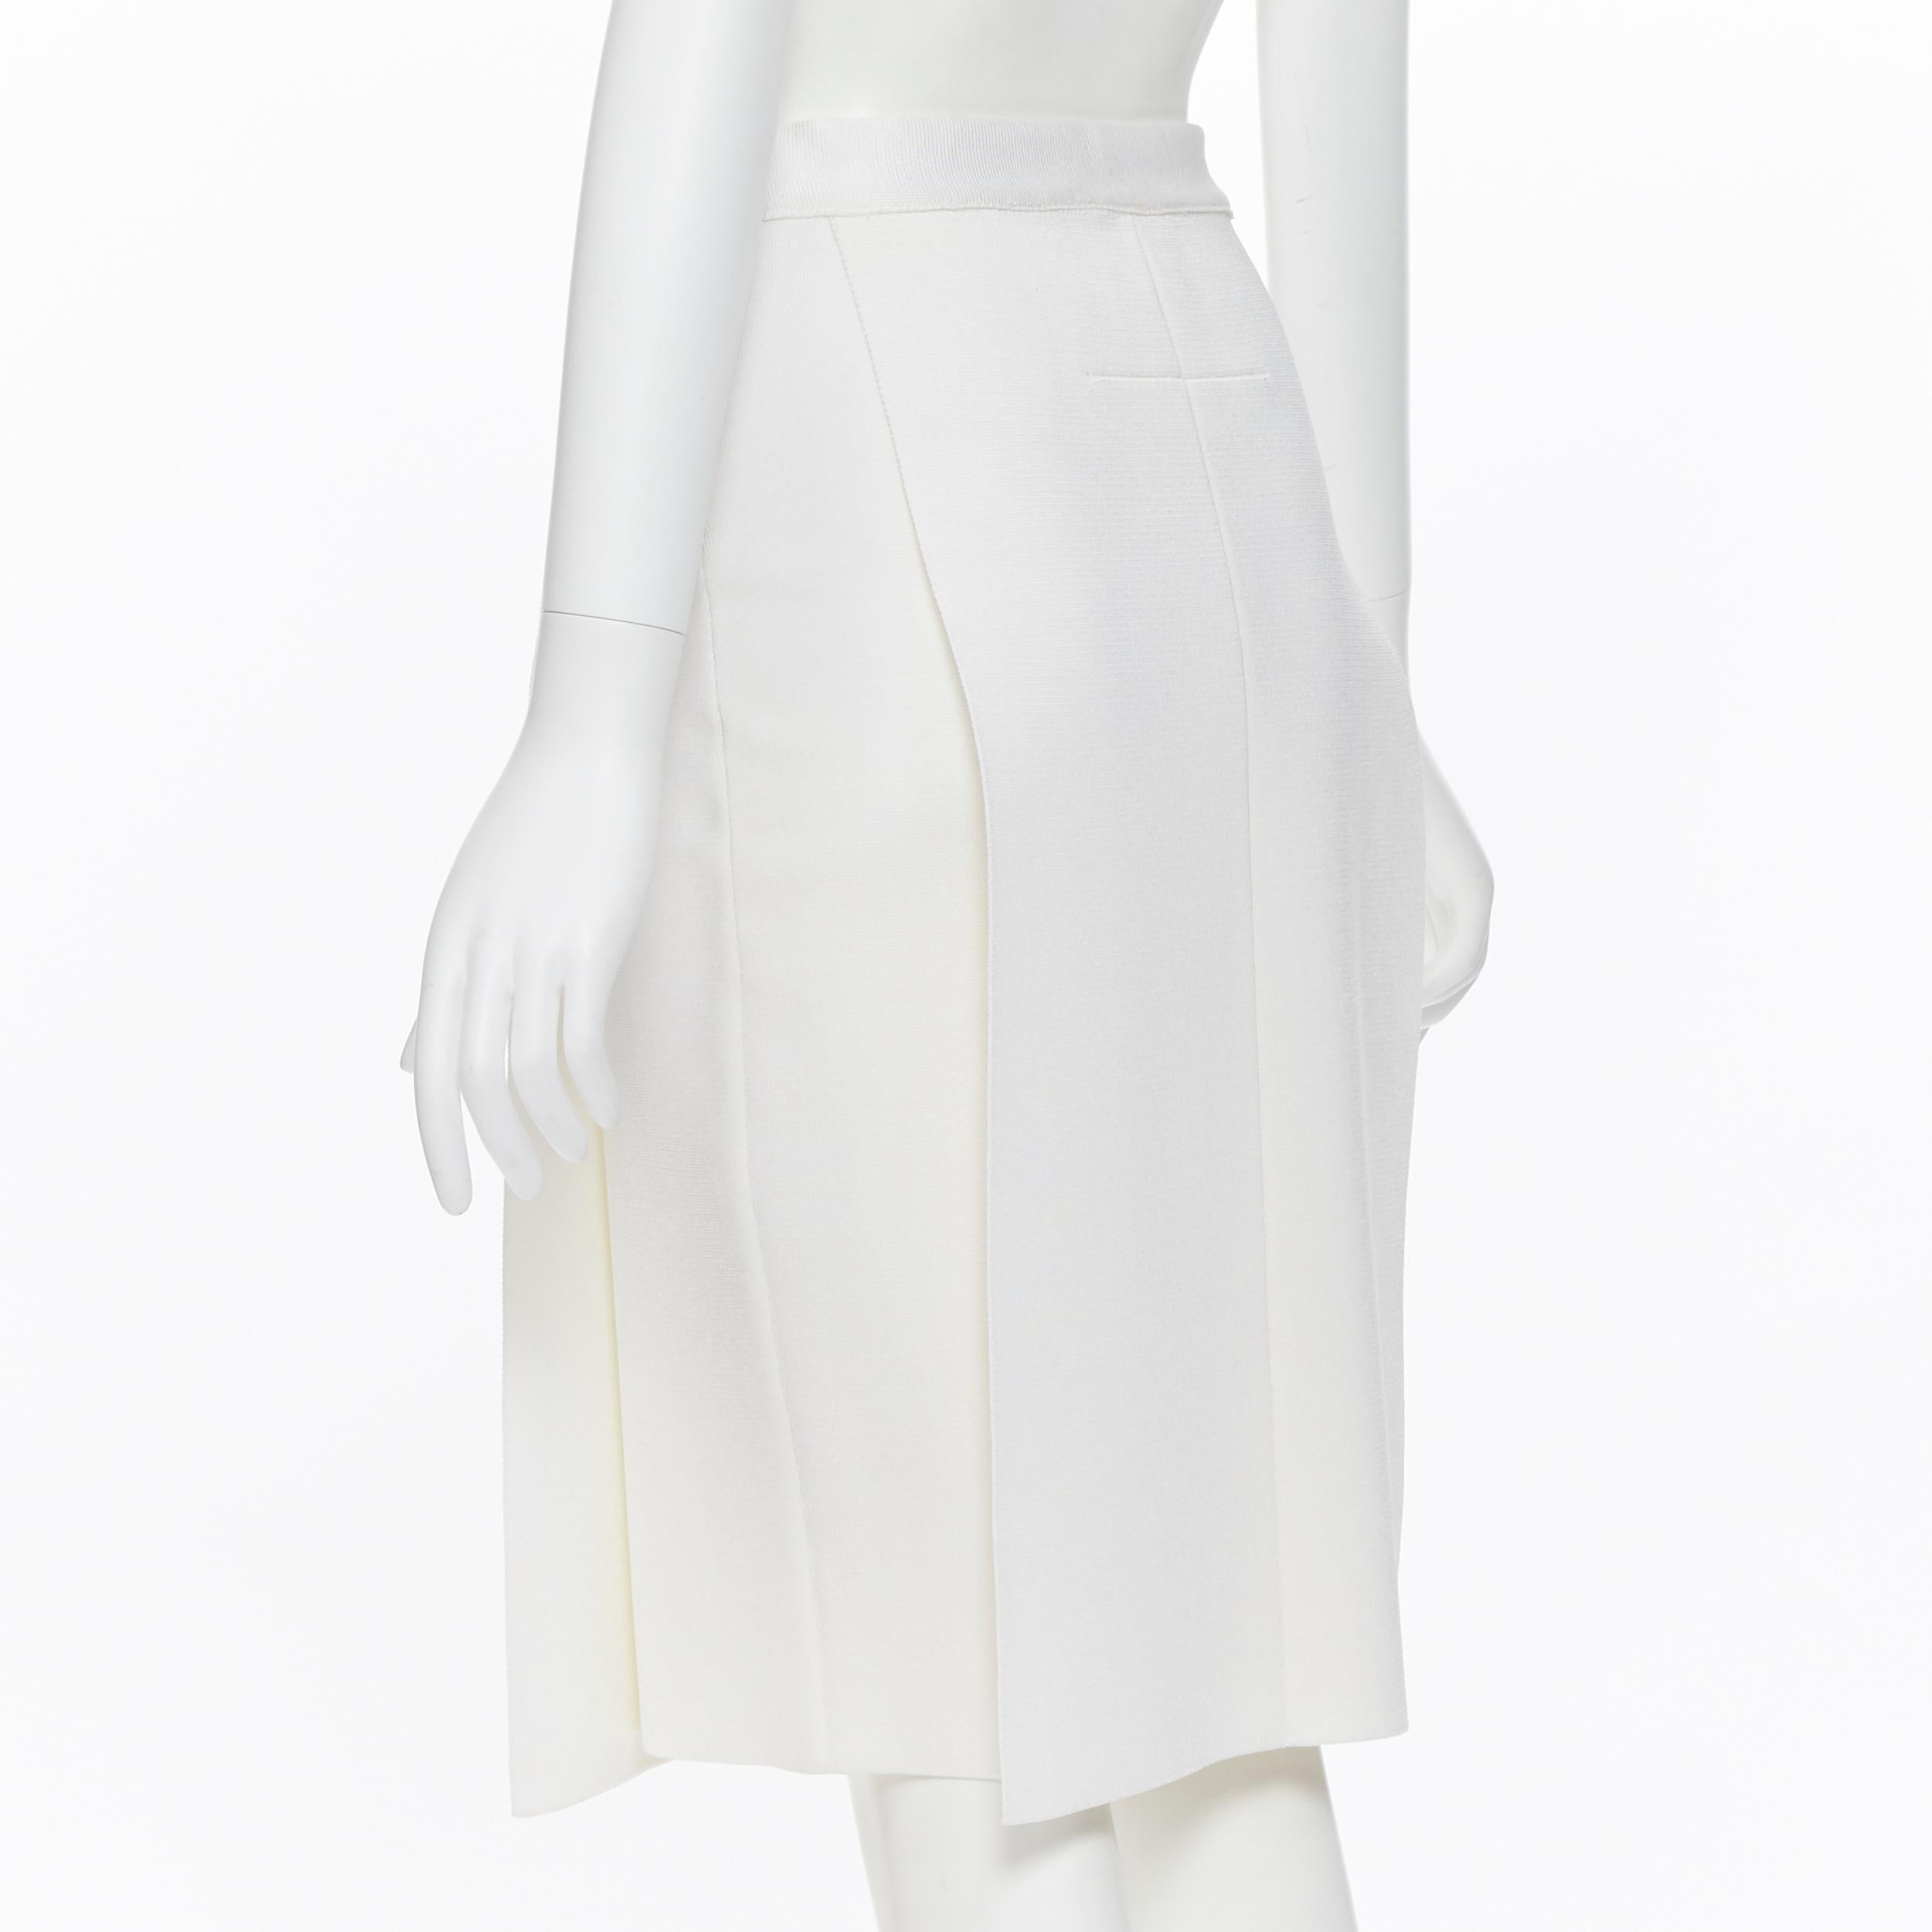 GIVENCHY TISCI white viscose knit panel front fitted pencil skirt M 26